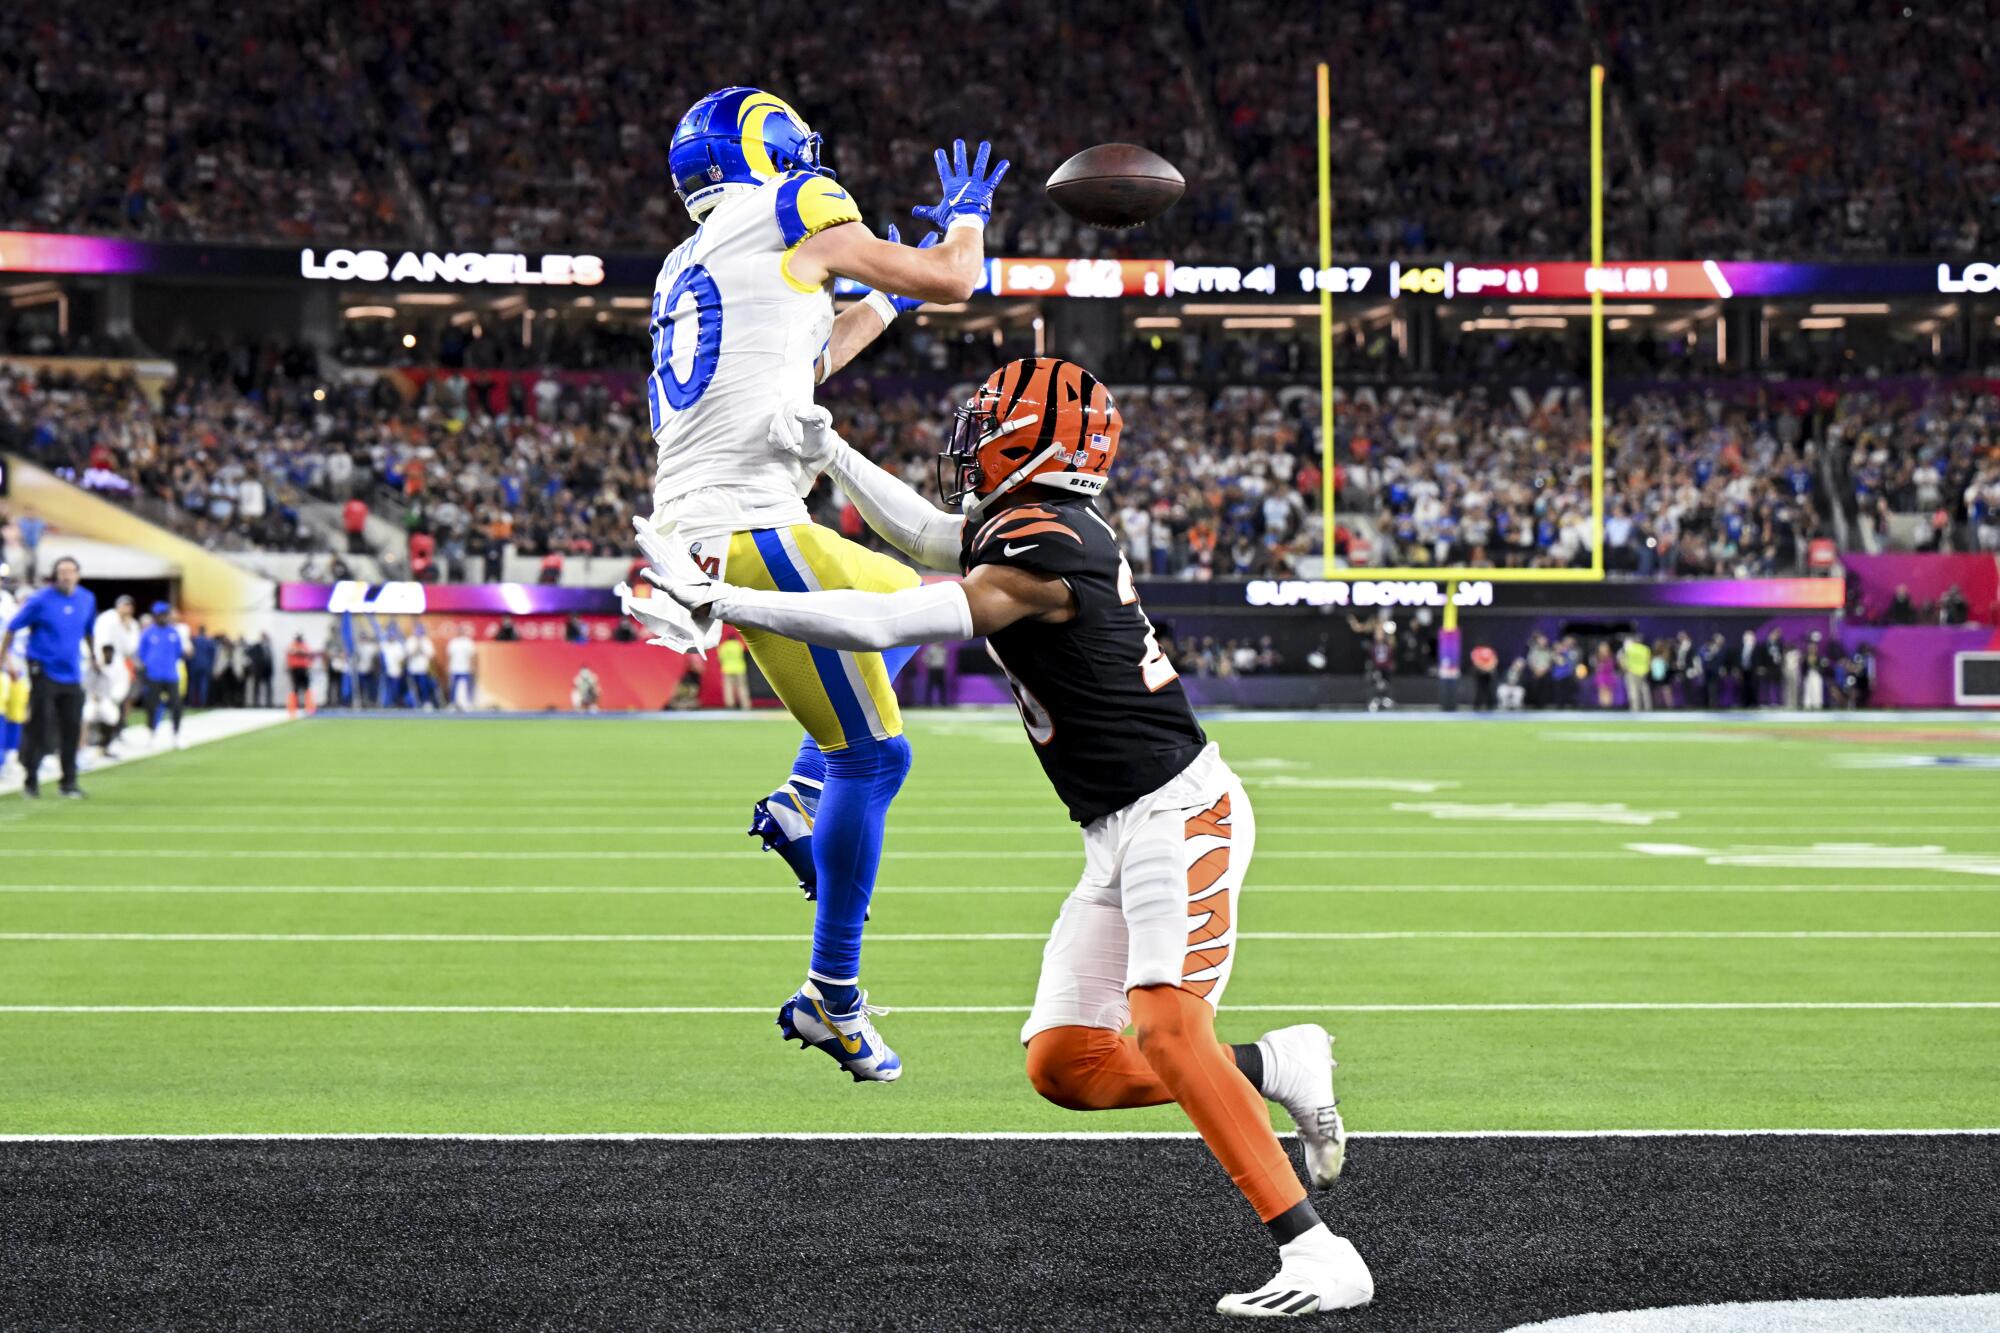 Rams receiver Cooper Kupp (10) catches a touchdown pass in front of Bengals cornerback Eli Apple (20) in Super Bowl LVI.